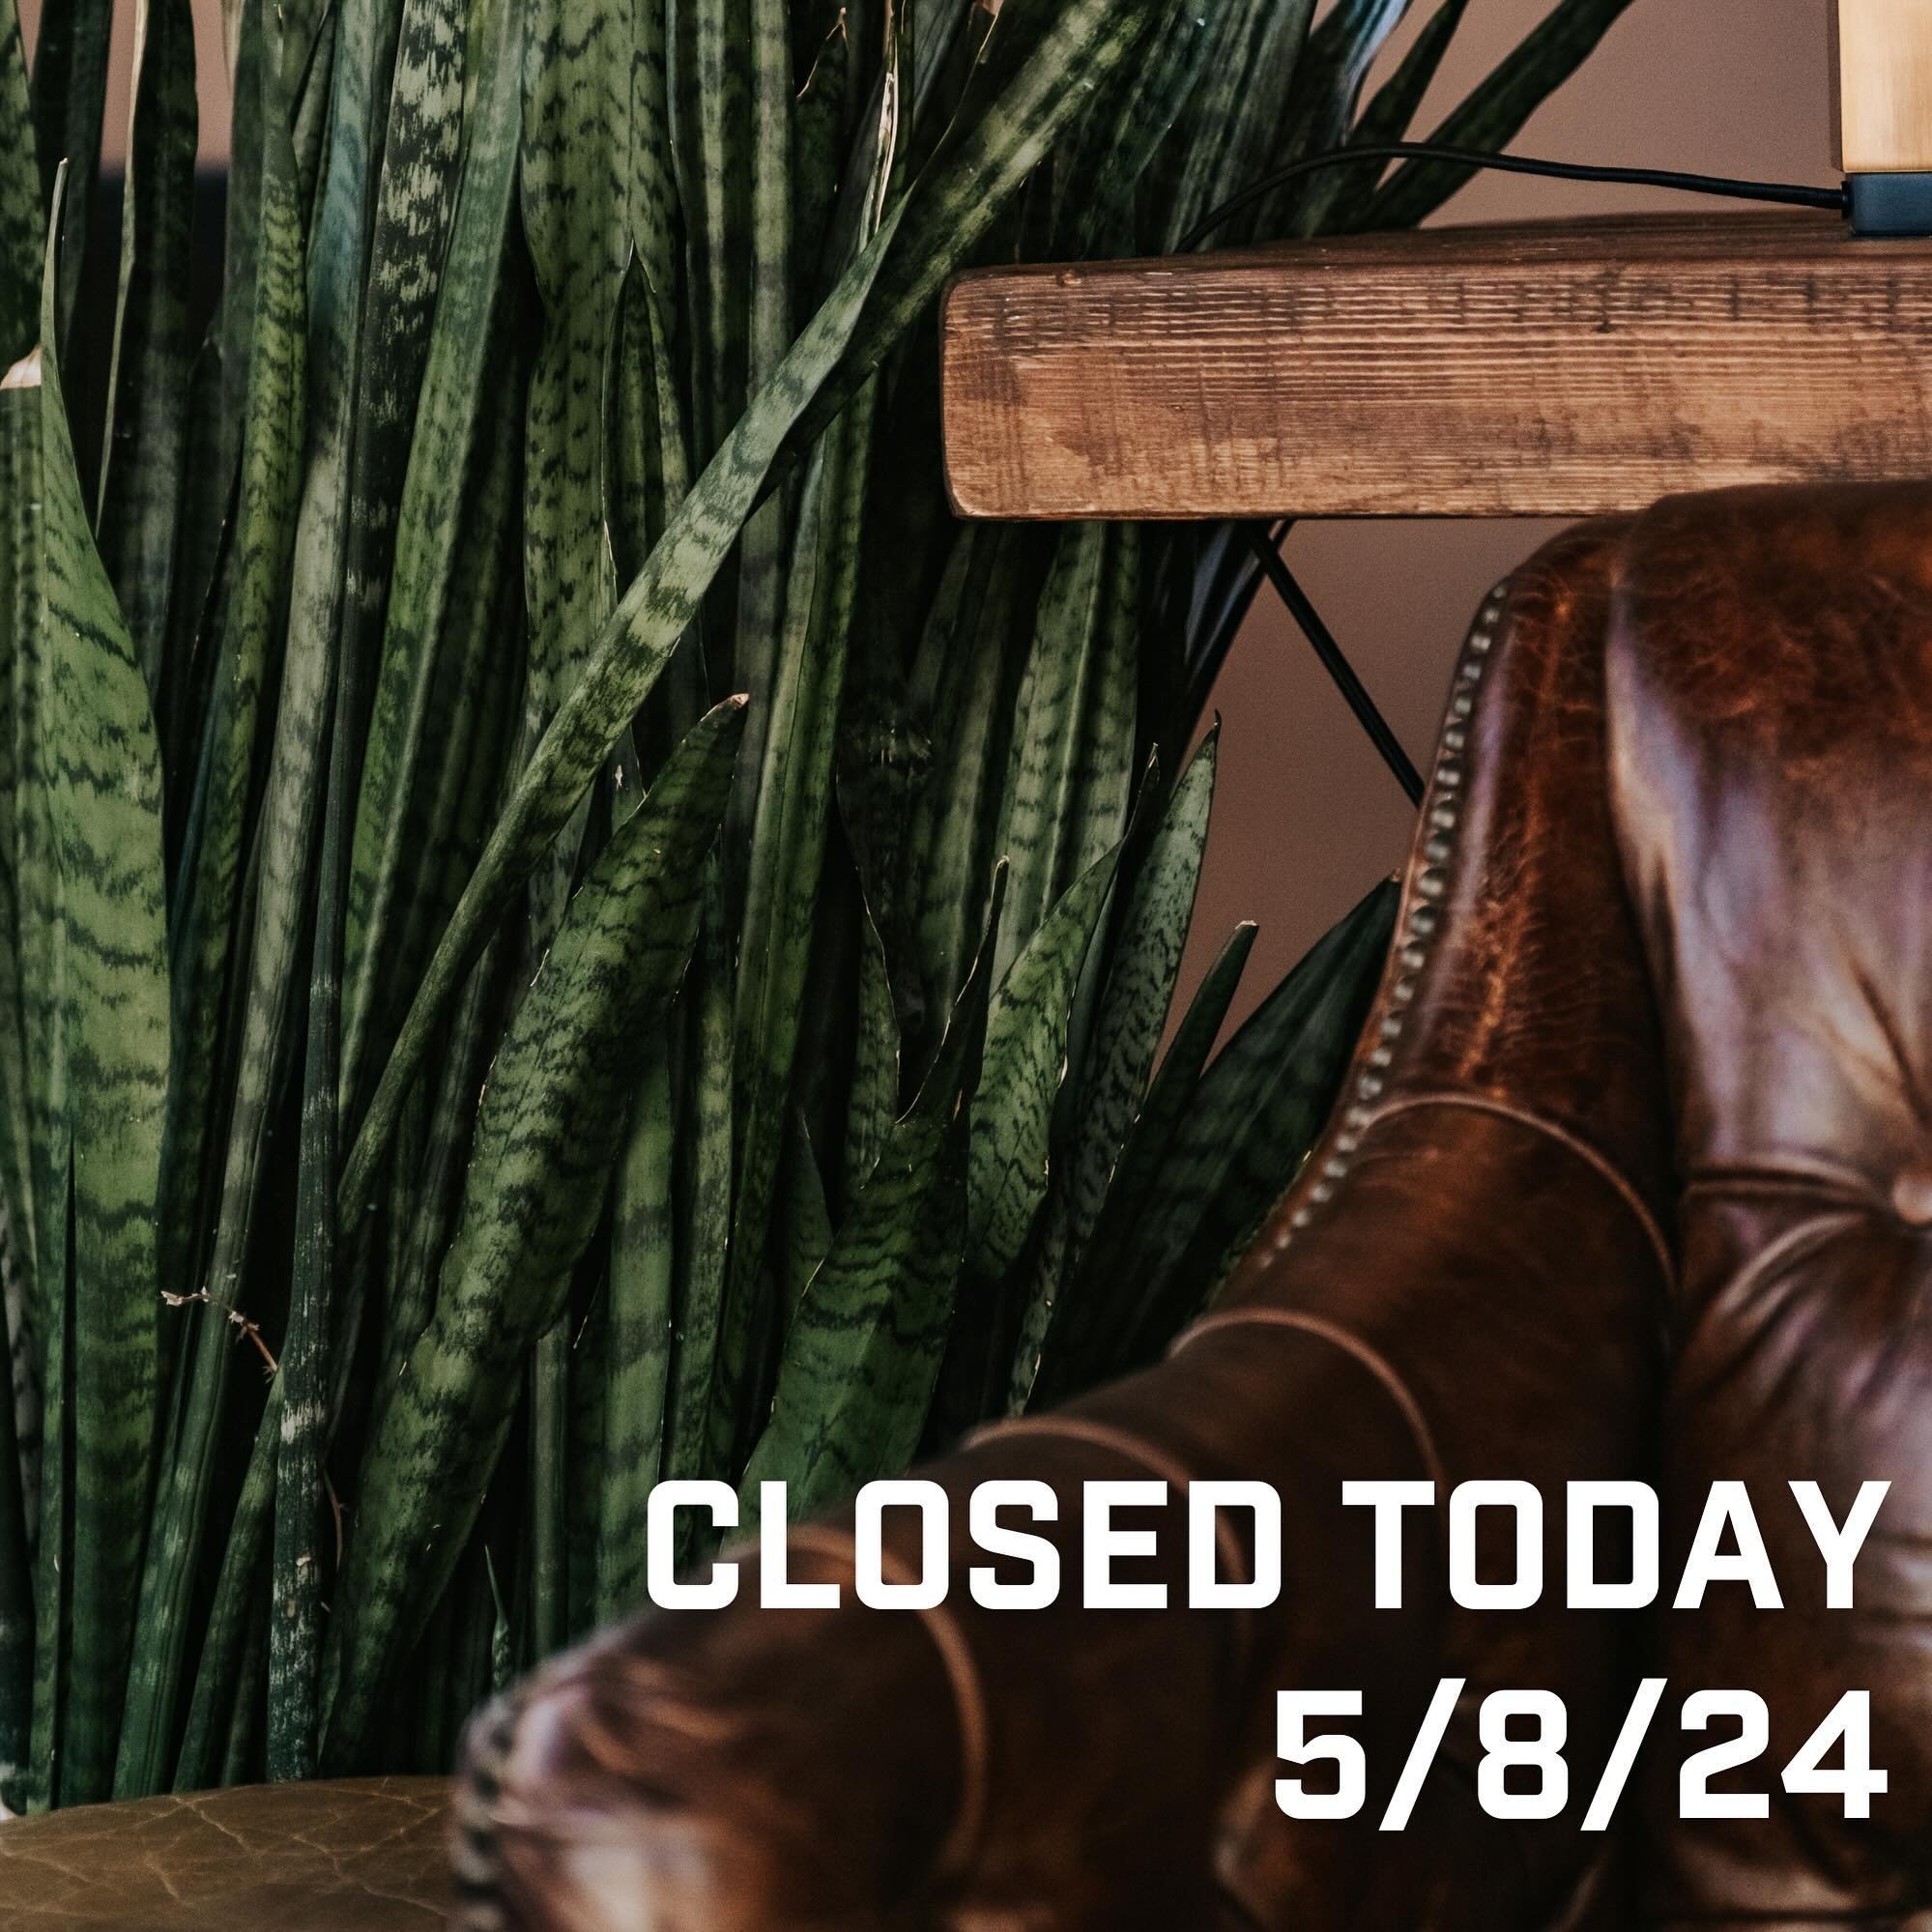 🚨 Closure Notice: We&rsquo;re sorry to announce that Society 57 will be closed today due to unexpected equipment issues. We apologize for any inconvenience this may cause and appreciate your understanding. Our team is working diligently to resolve t